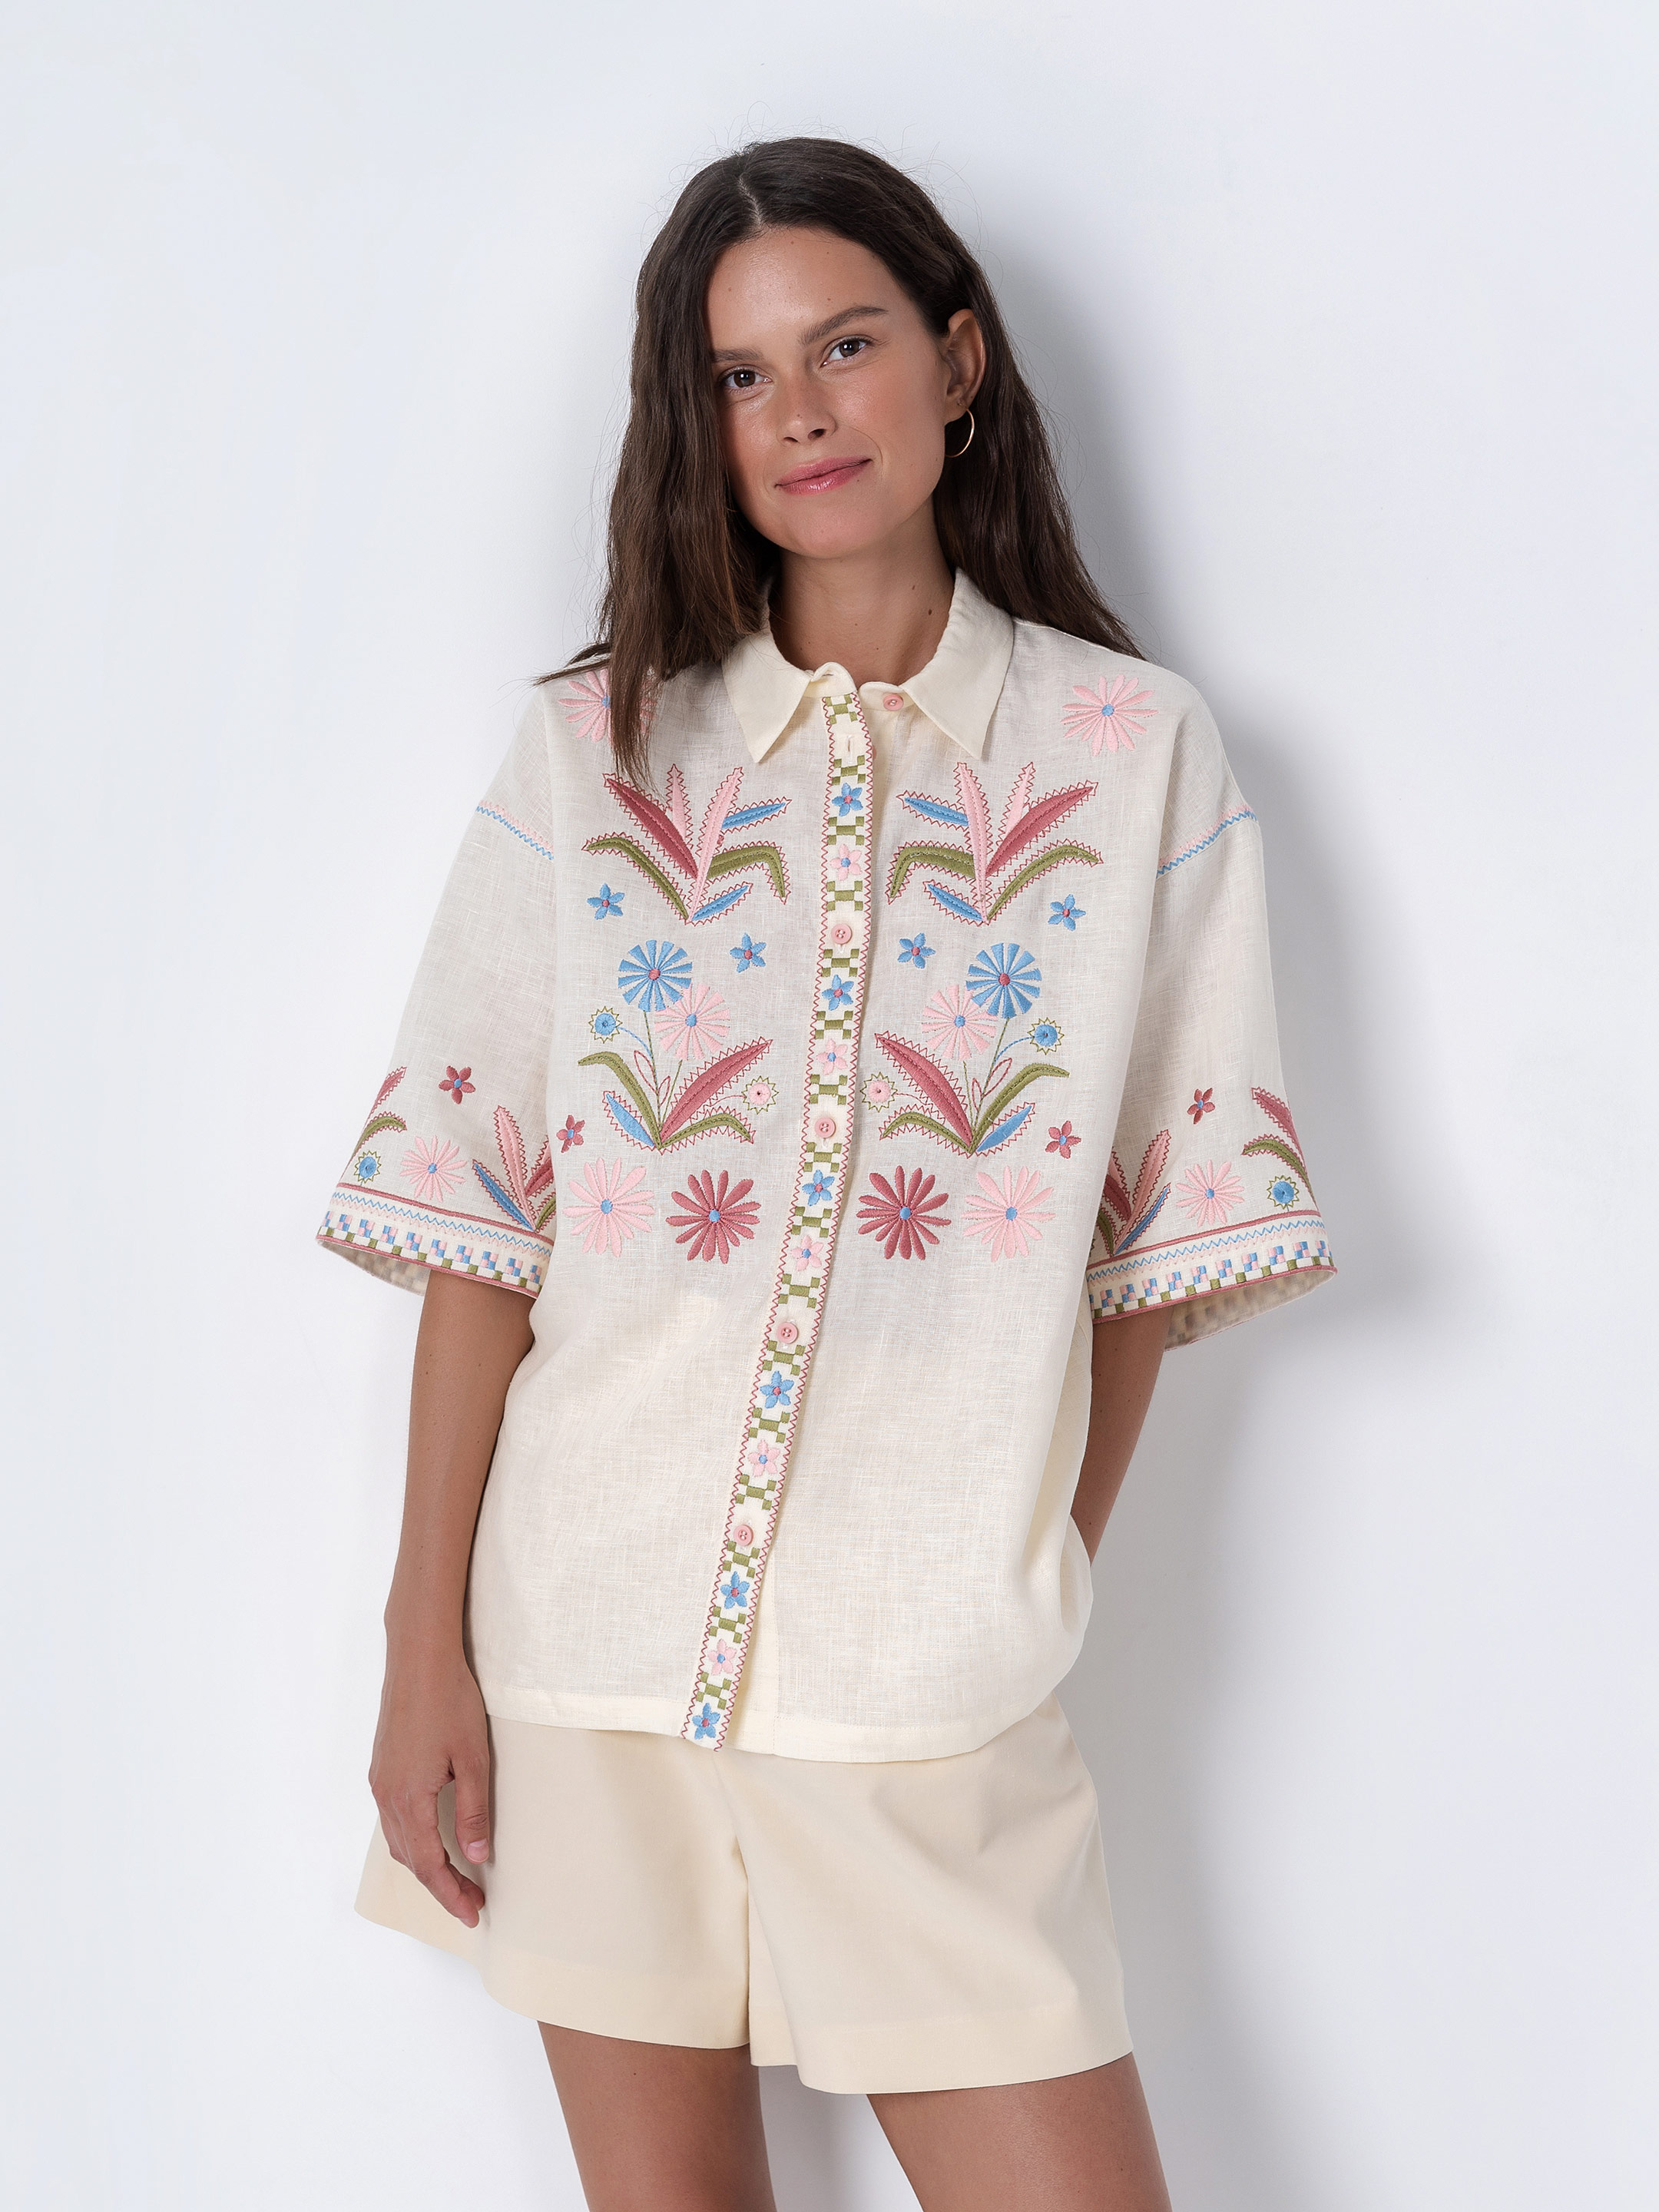 Linen shirt with floral embroidery Veselka - photo 1